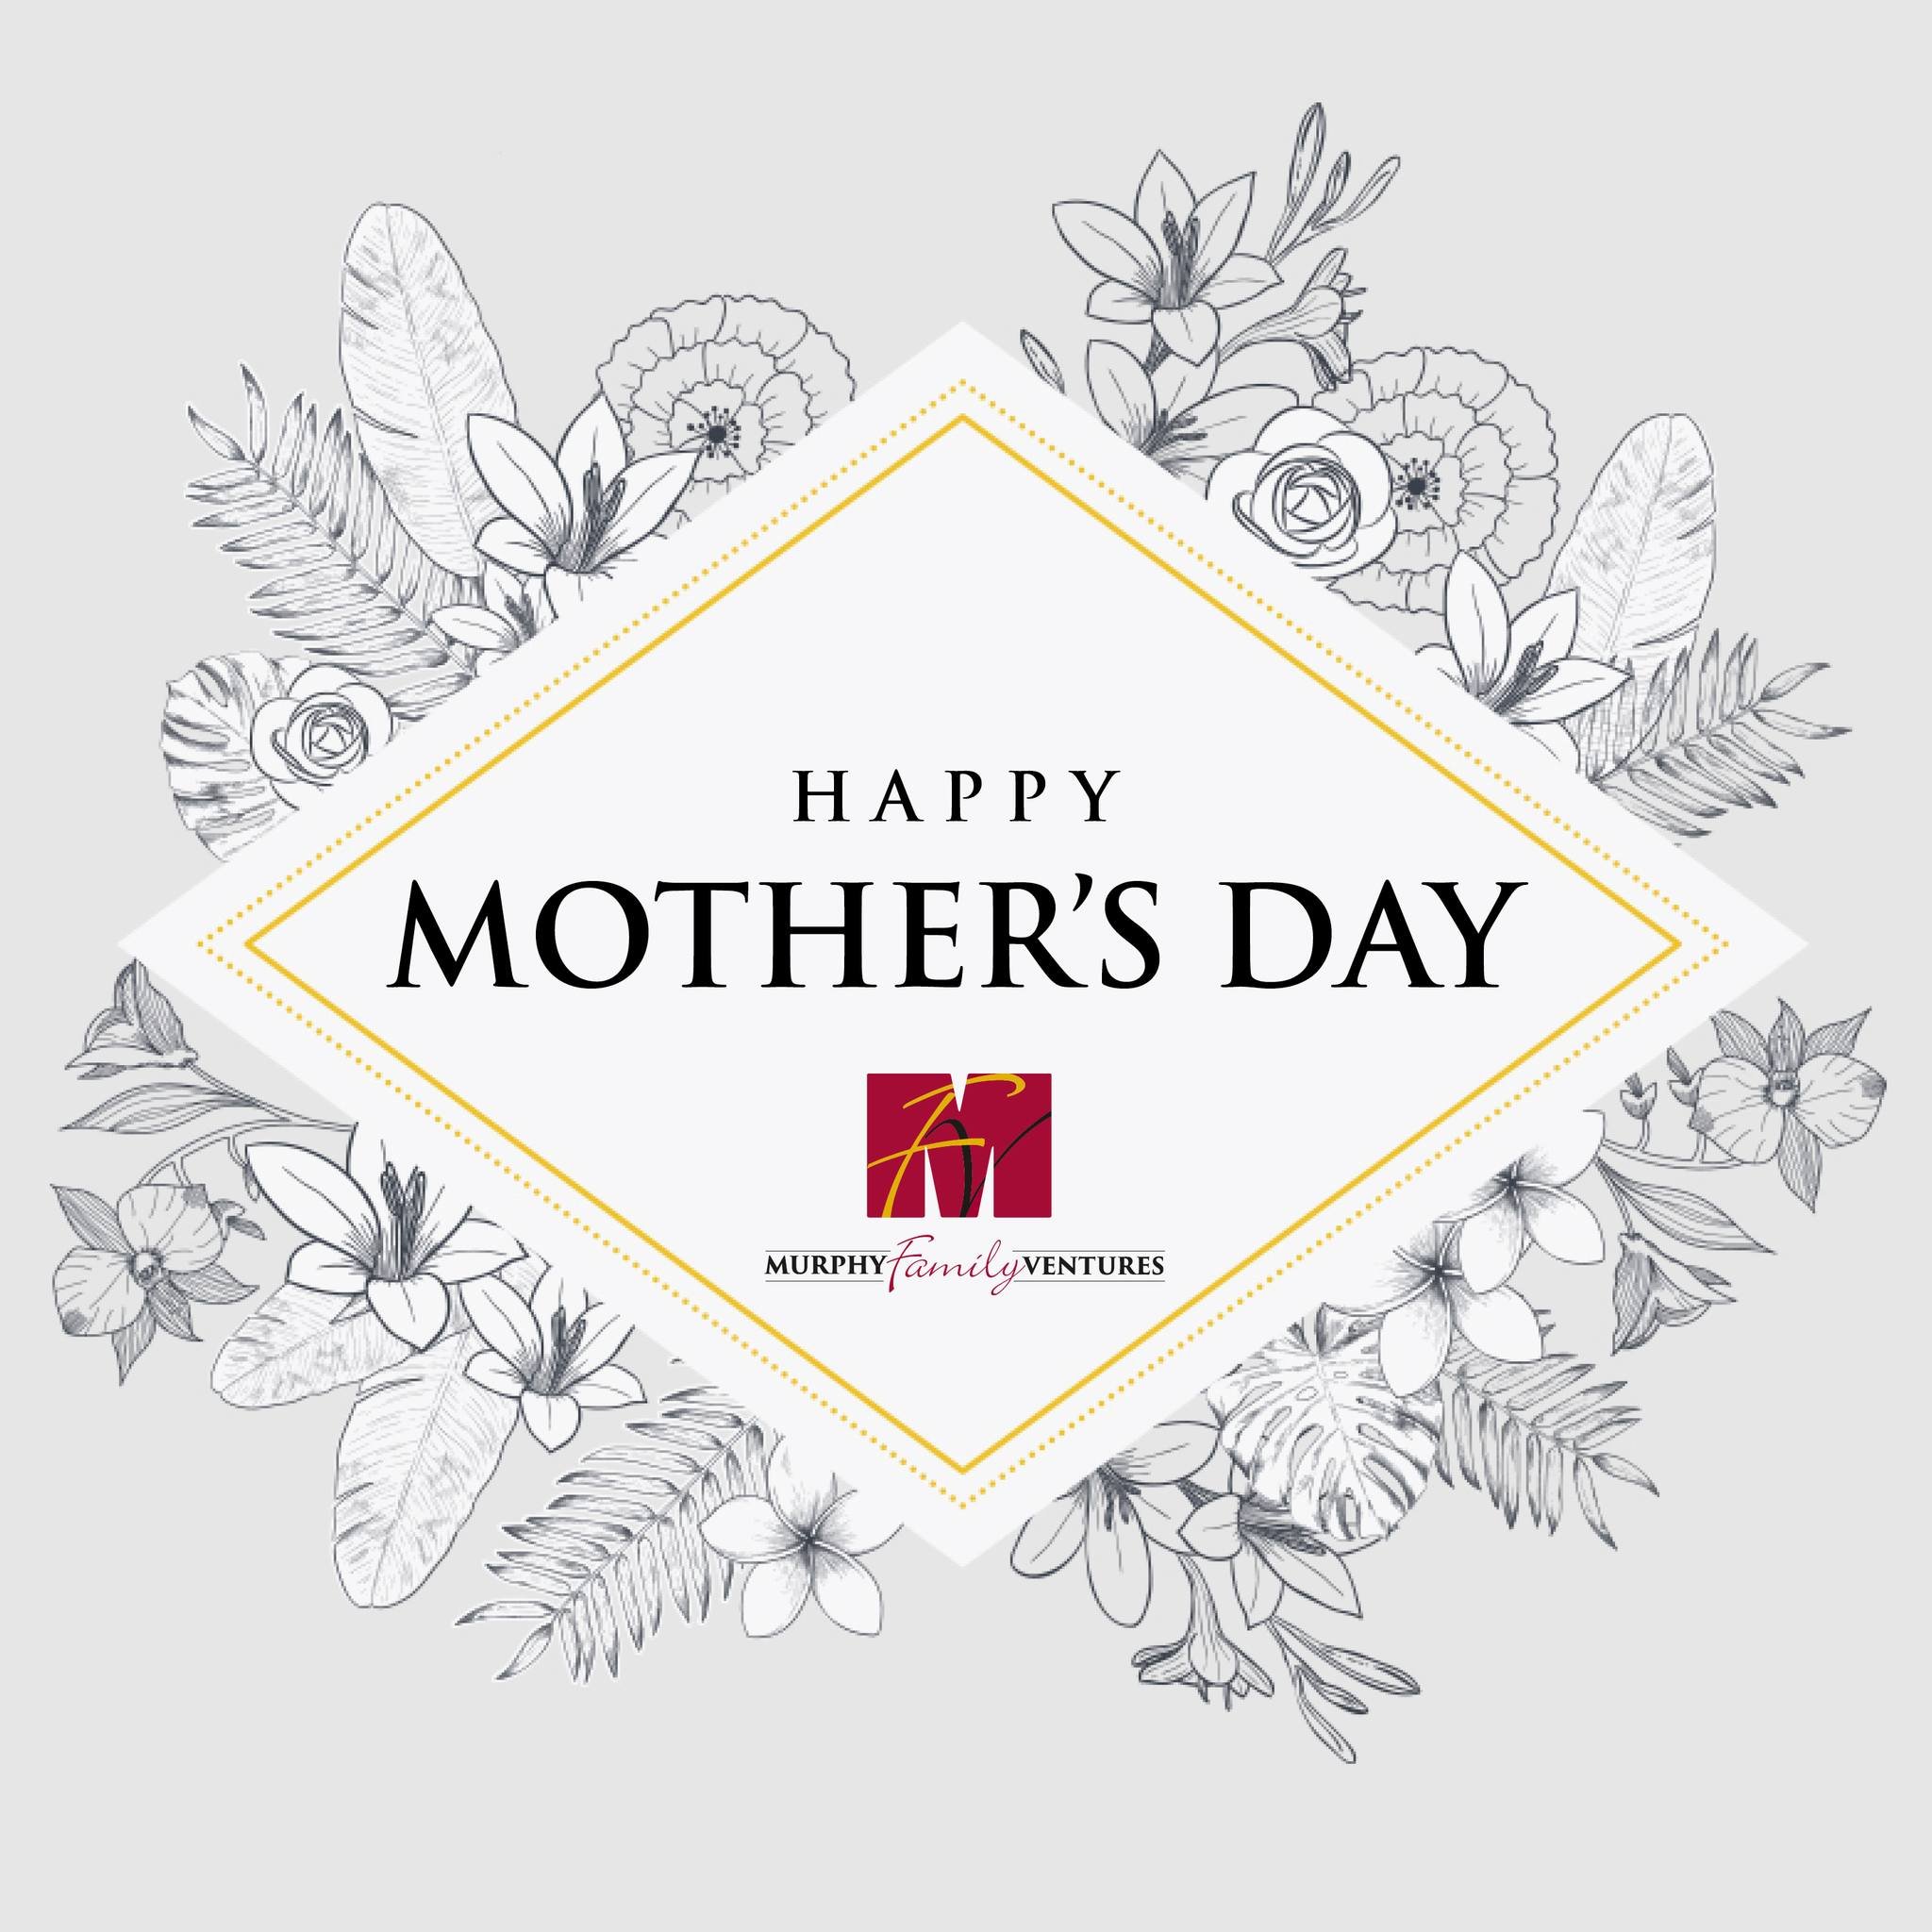 Happy Mother's Day to the moms, grandmothers, and all the mother-figures out there! Wishing you a wonderful day filled with love and appreciation!